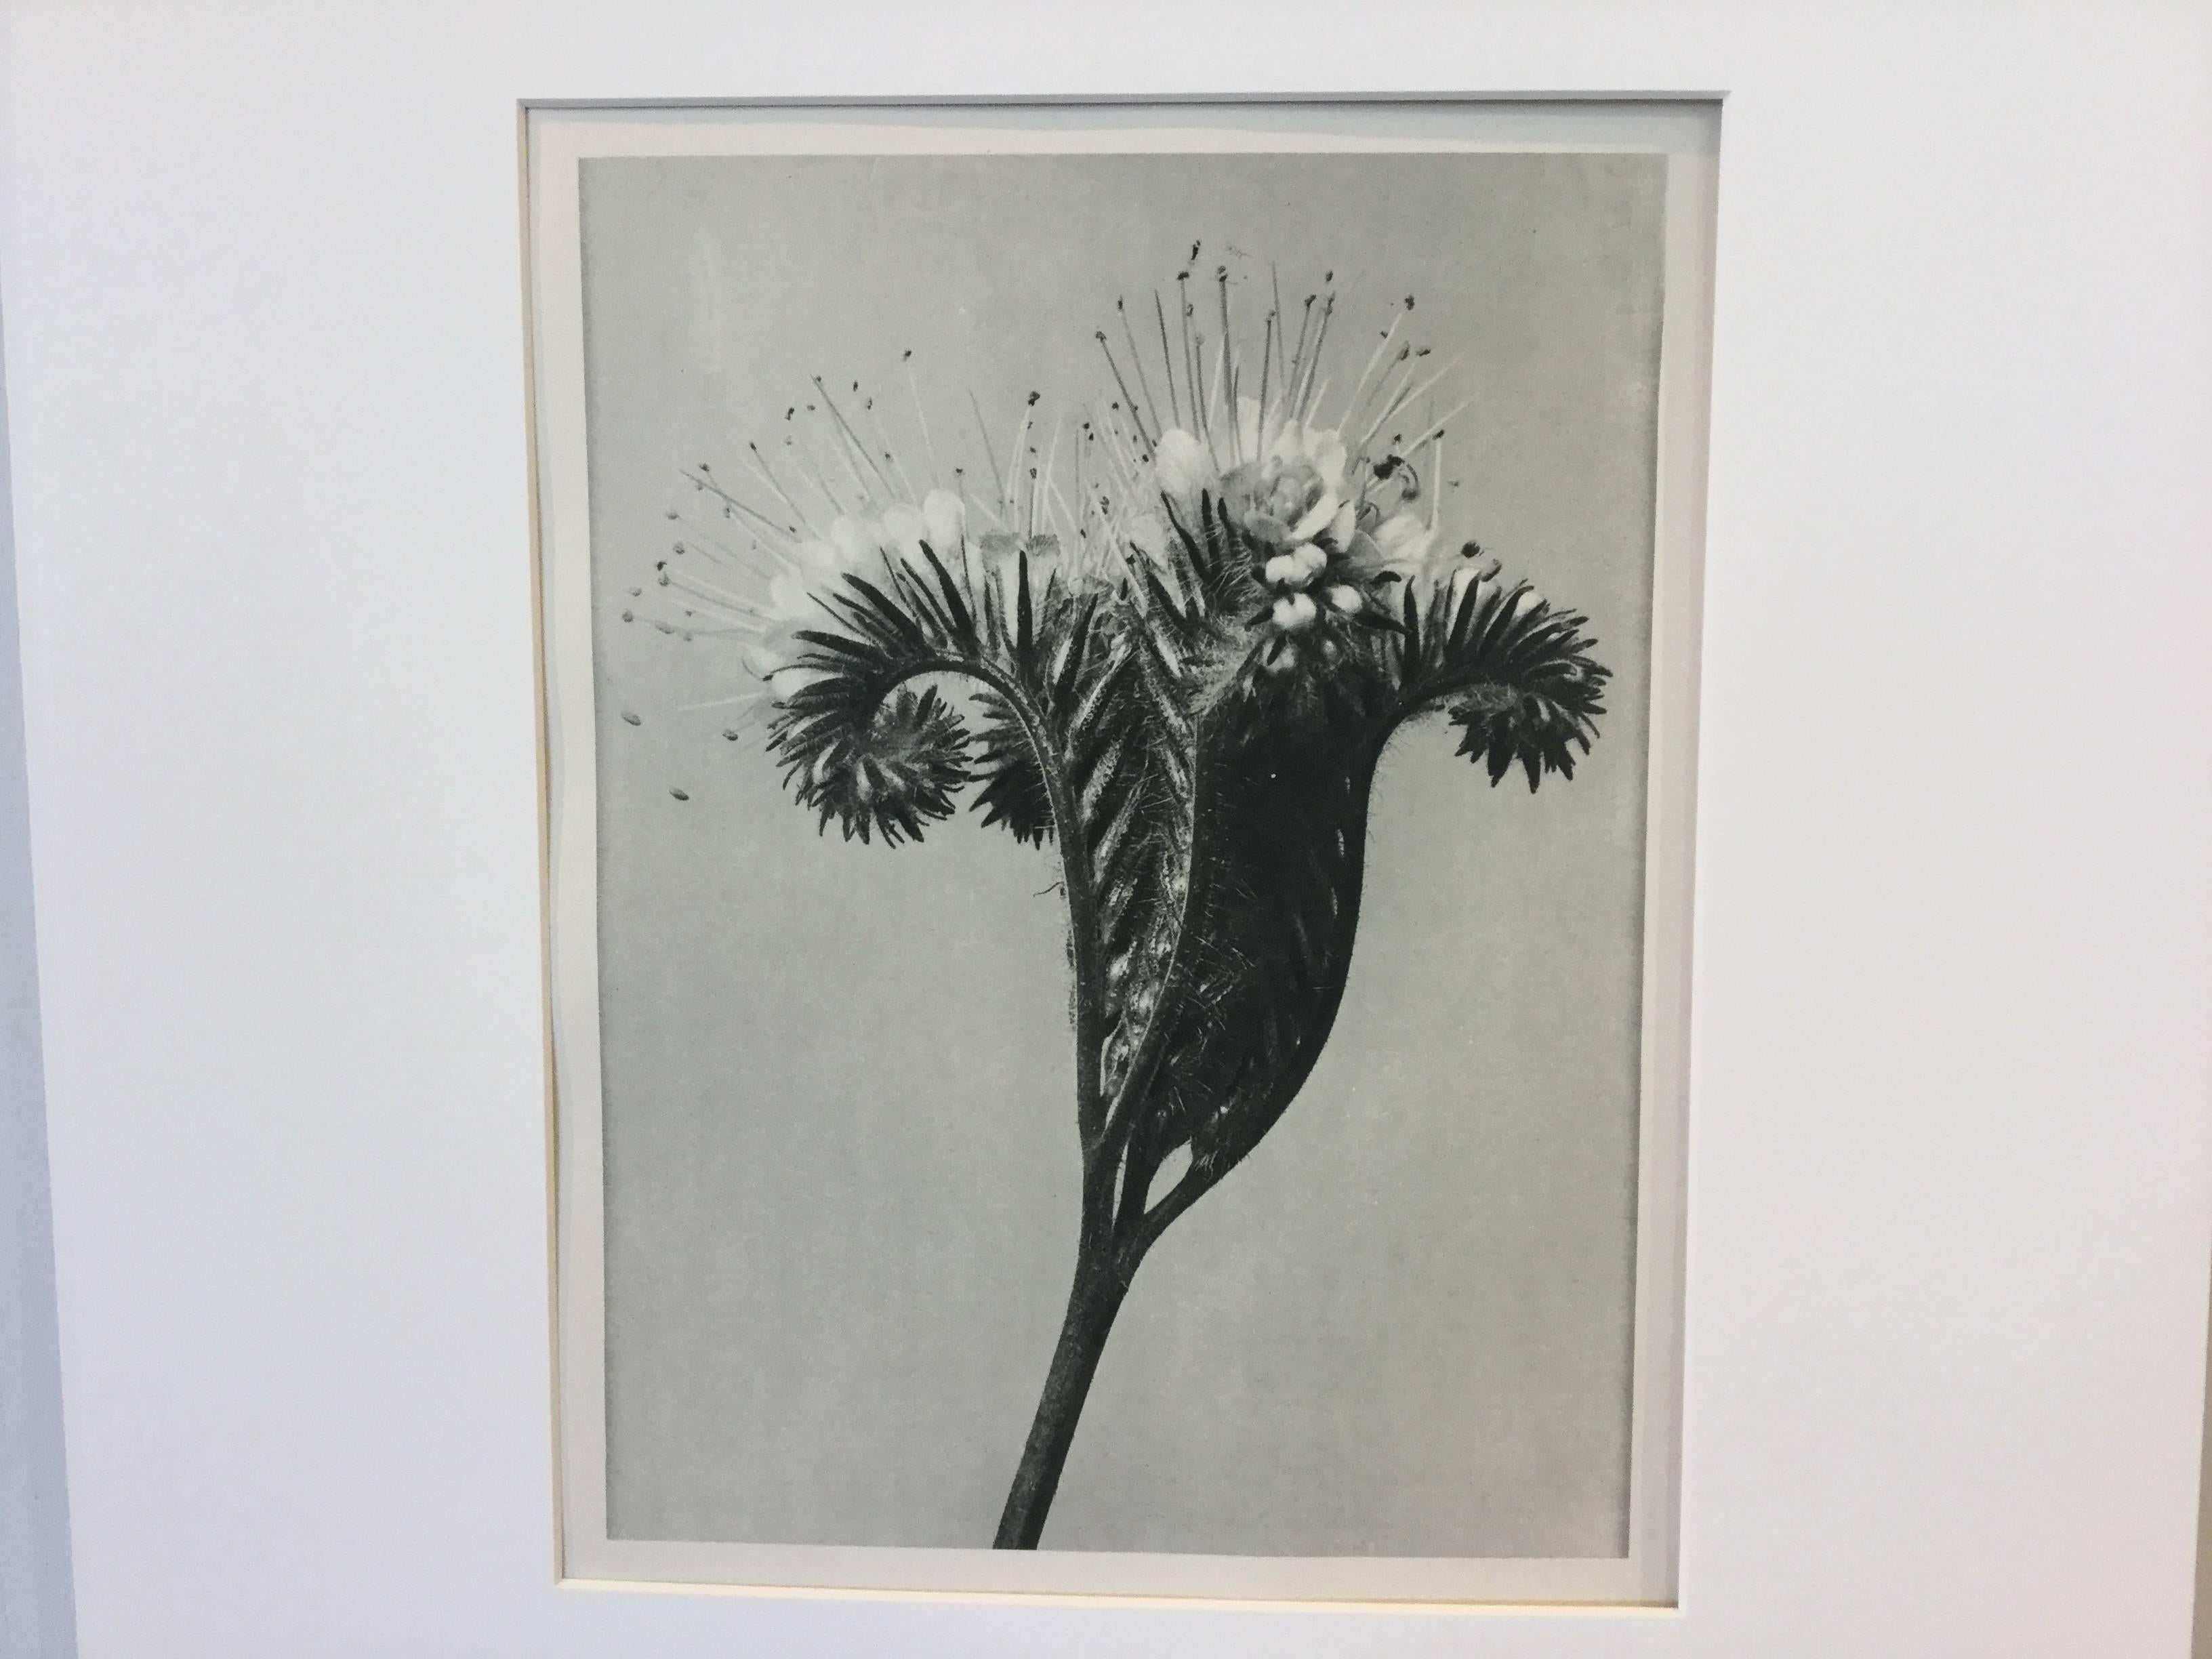 Blossfeldt Photogravure from the first German edition 1928. Blossfeldt taught sculpture and took these photographs like this one to show form in nature. He became known for his photographs. The print is matted in an archival matte.